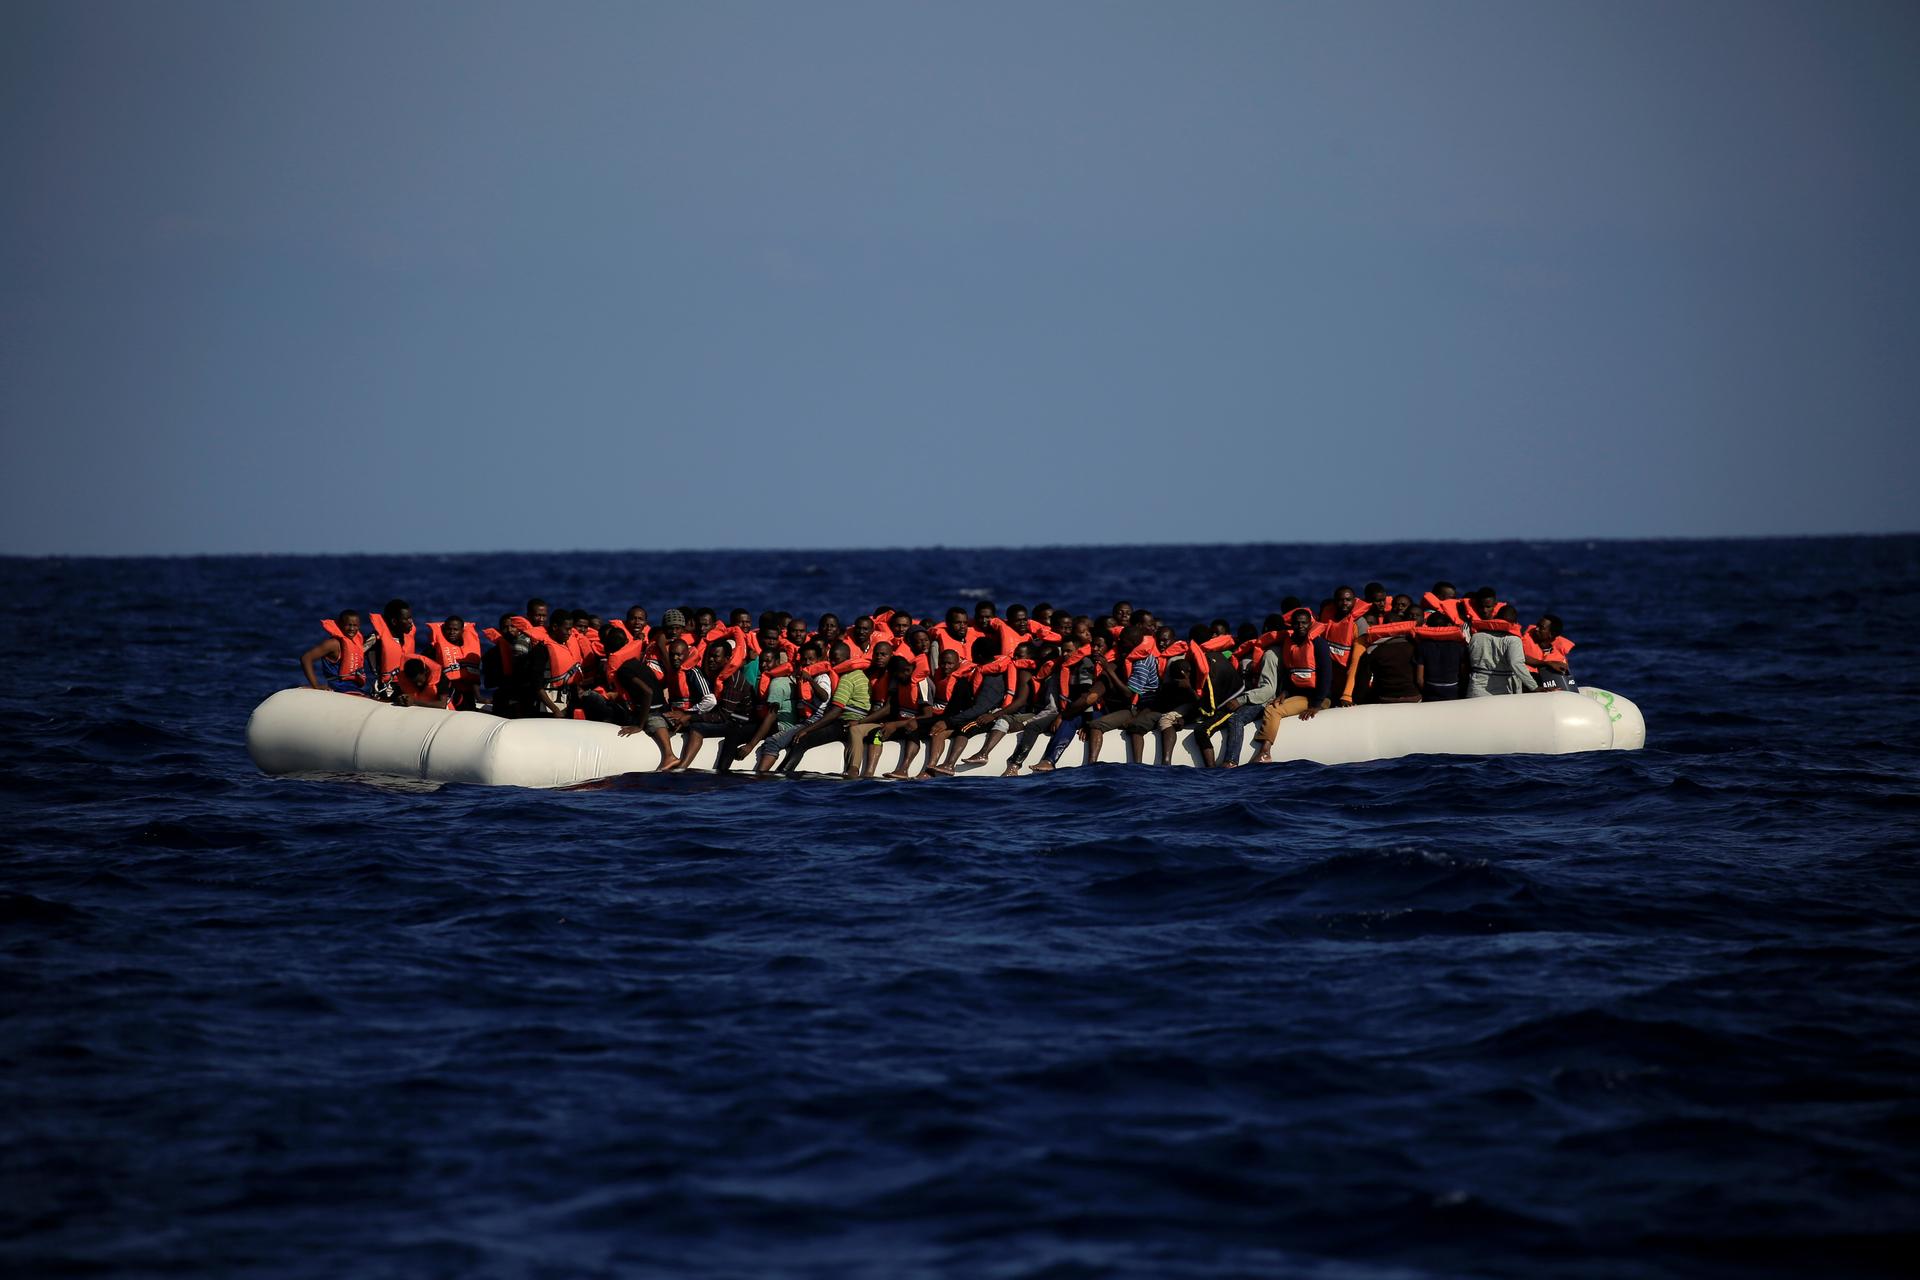 An overcrowded dinghy with migrants from different African countries is seen after members of the German NGO Jugend Rettet guided them towards the Iuventa vessel during a rescue operation, off the Libyan coast in the Mediterranean Sea September 21, 2016.